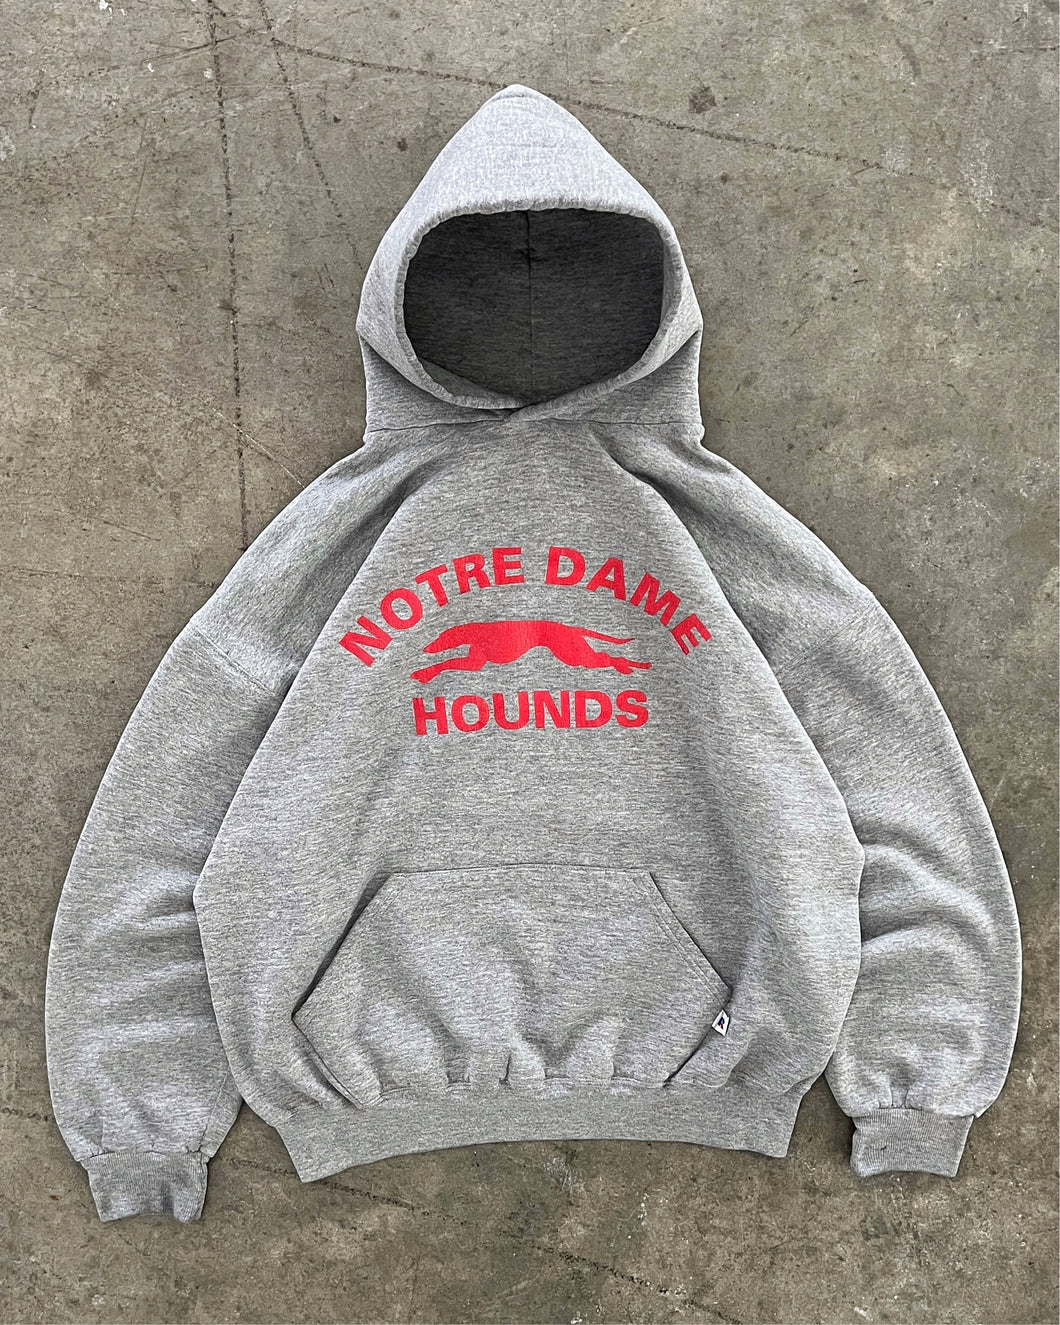 GREY “NOTRE DAME HOUNDS” RUSSELL HOODIE 1990S